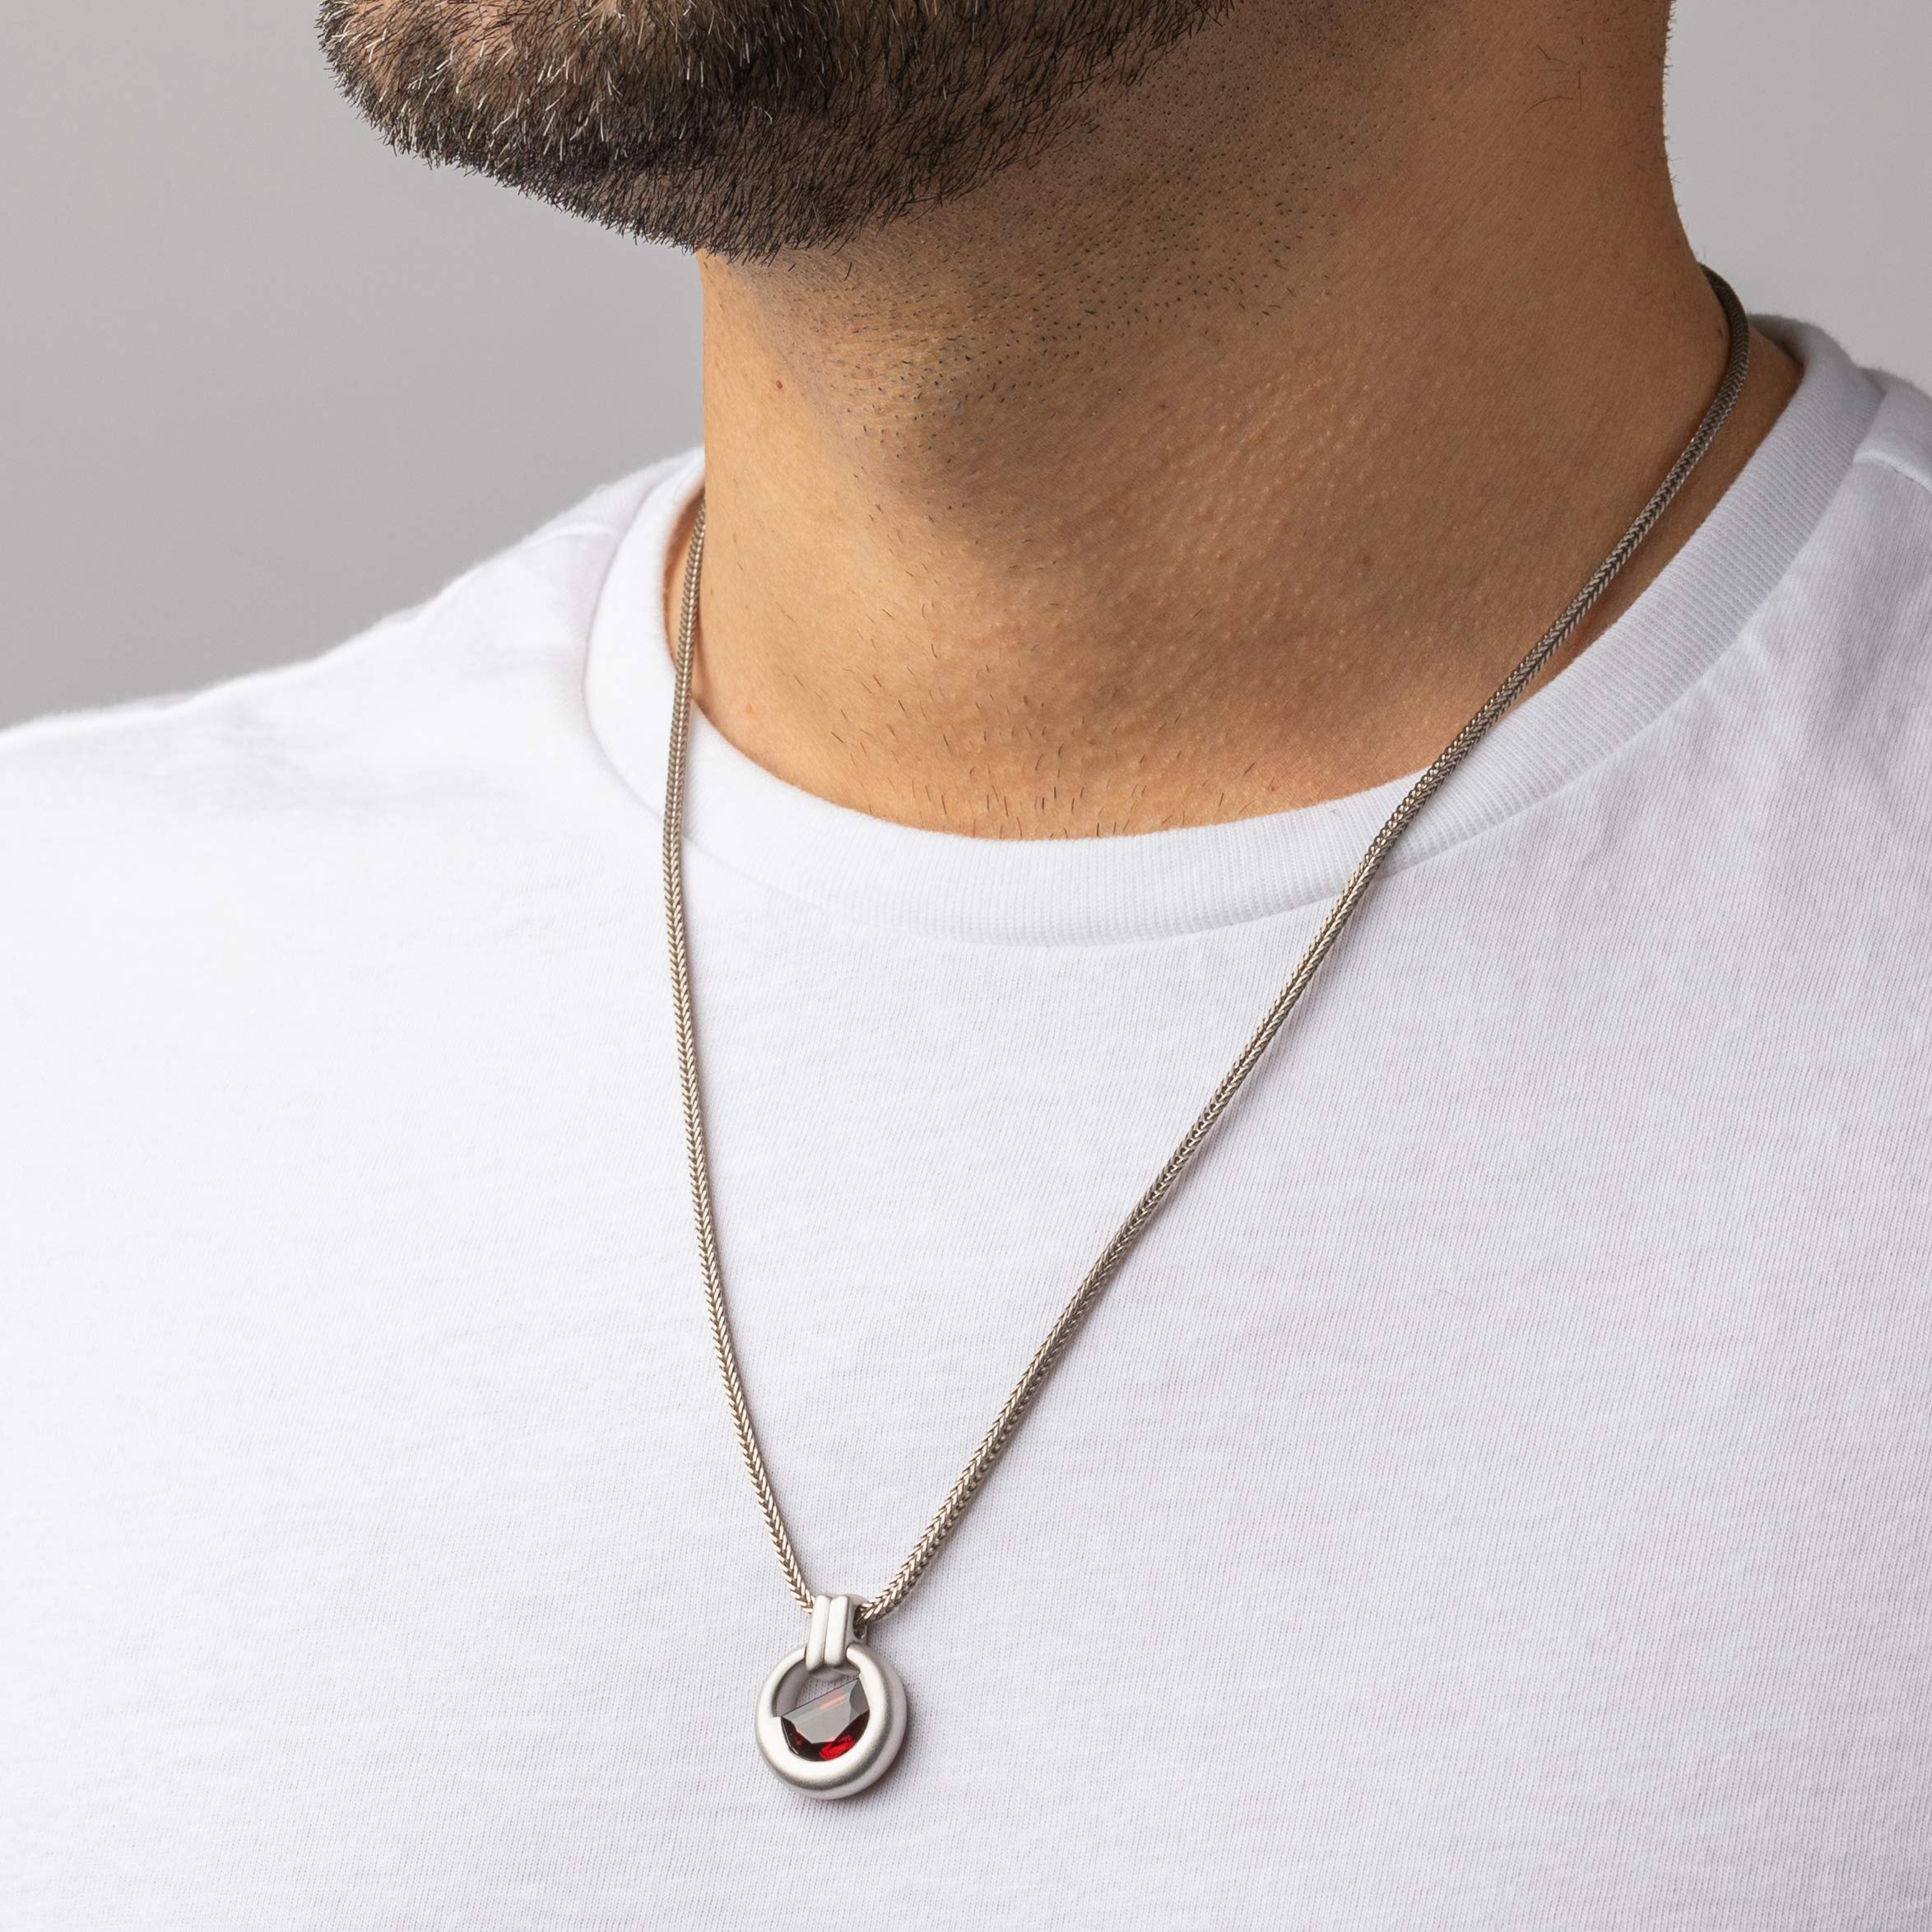 Peora Garnet Amulet Pendant Necklace for Men in Sterling Silver, 4.50 Carats Half Moon Shape, Brushed Finished, with 22-Inch Italian Chain